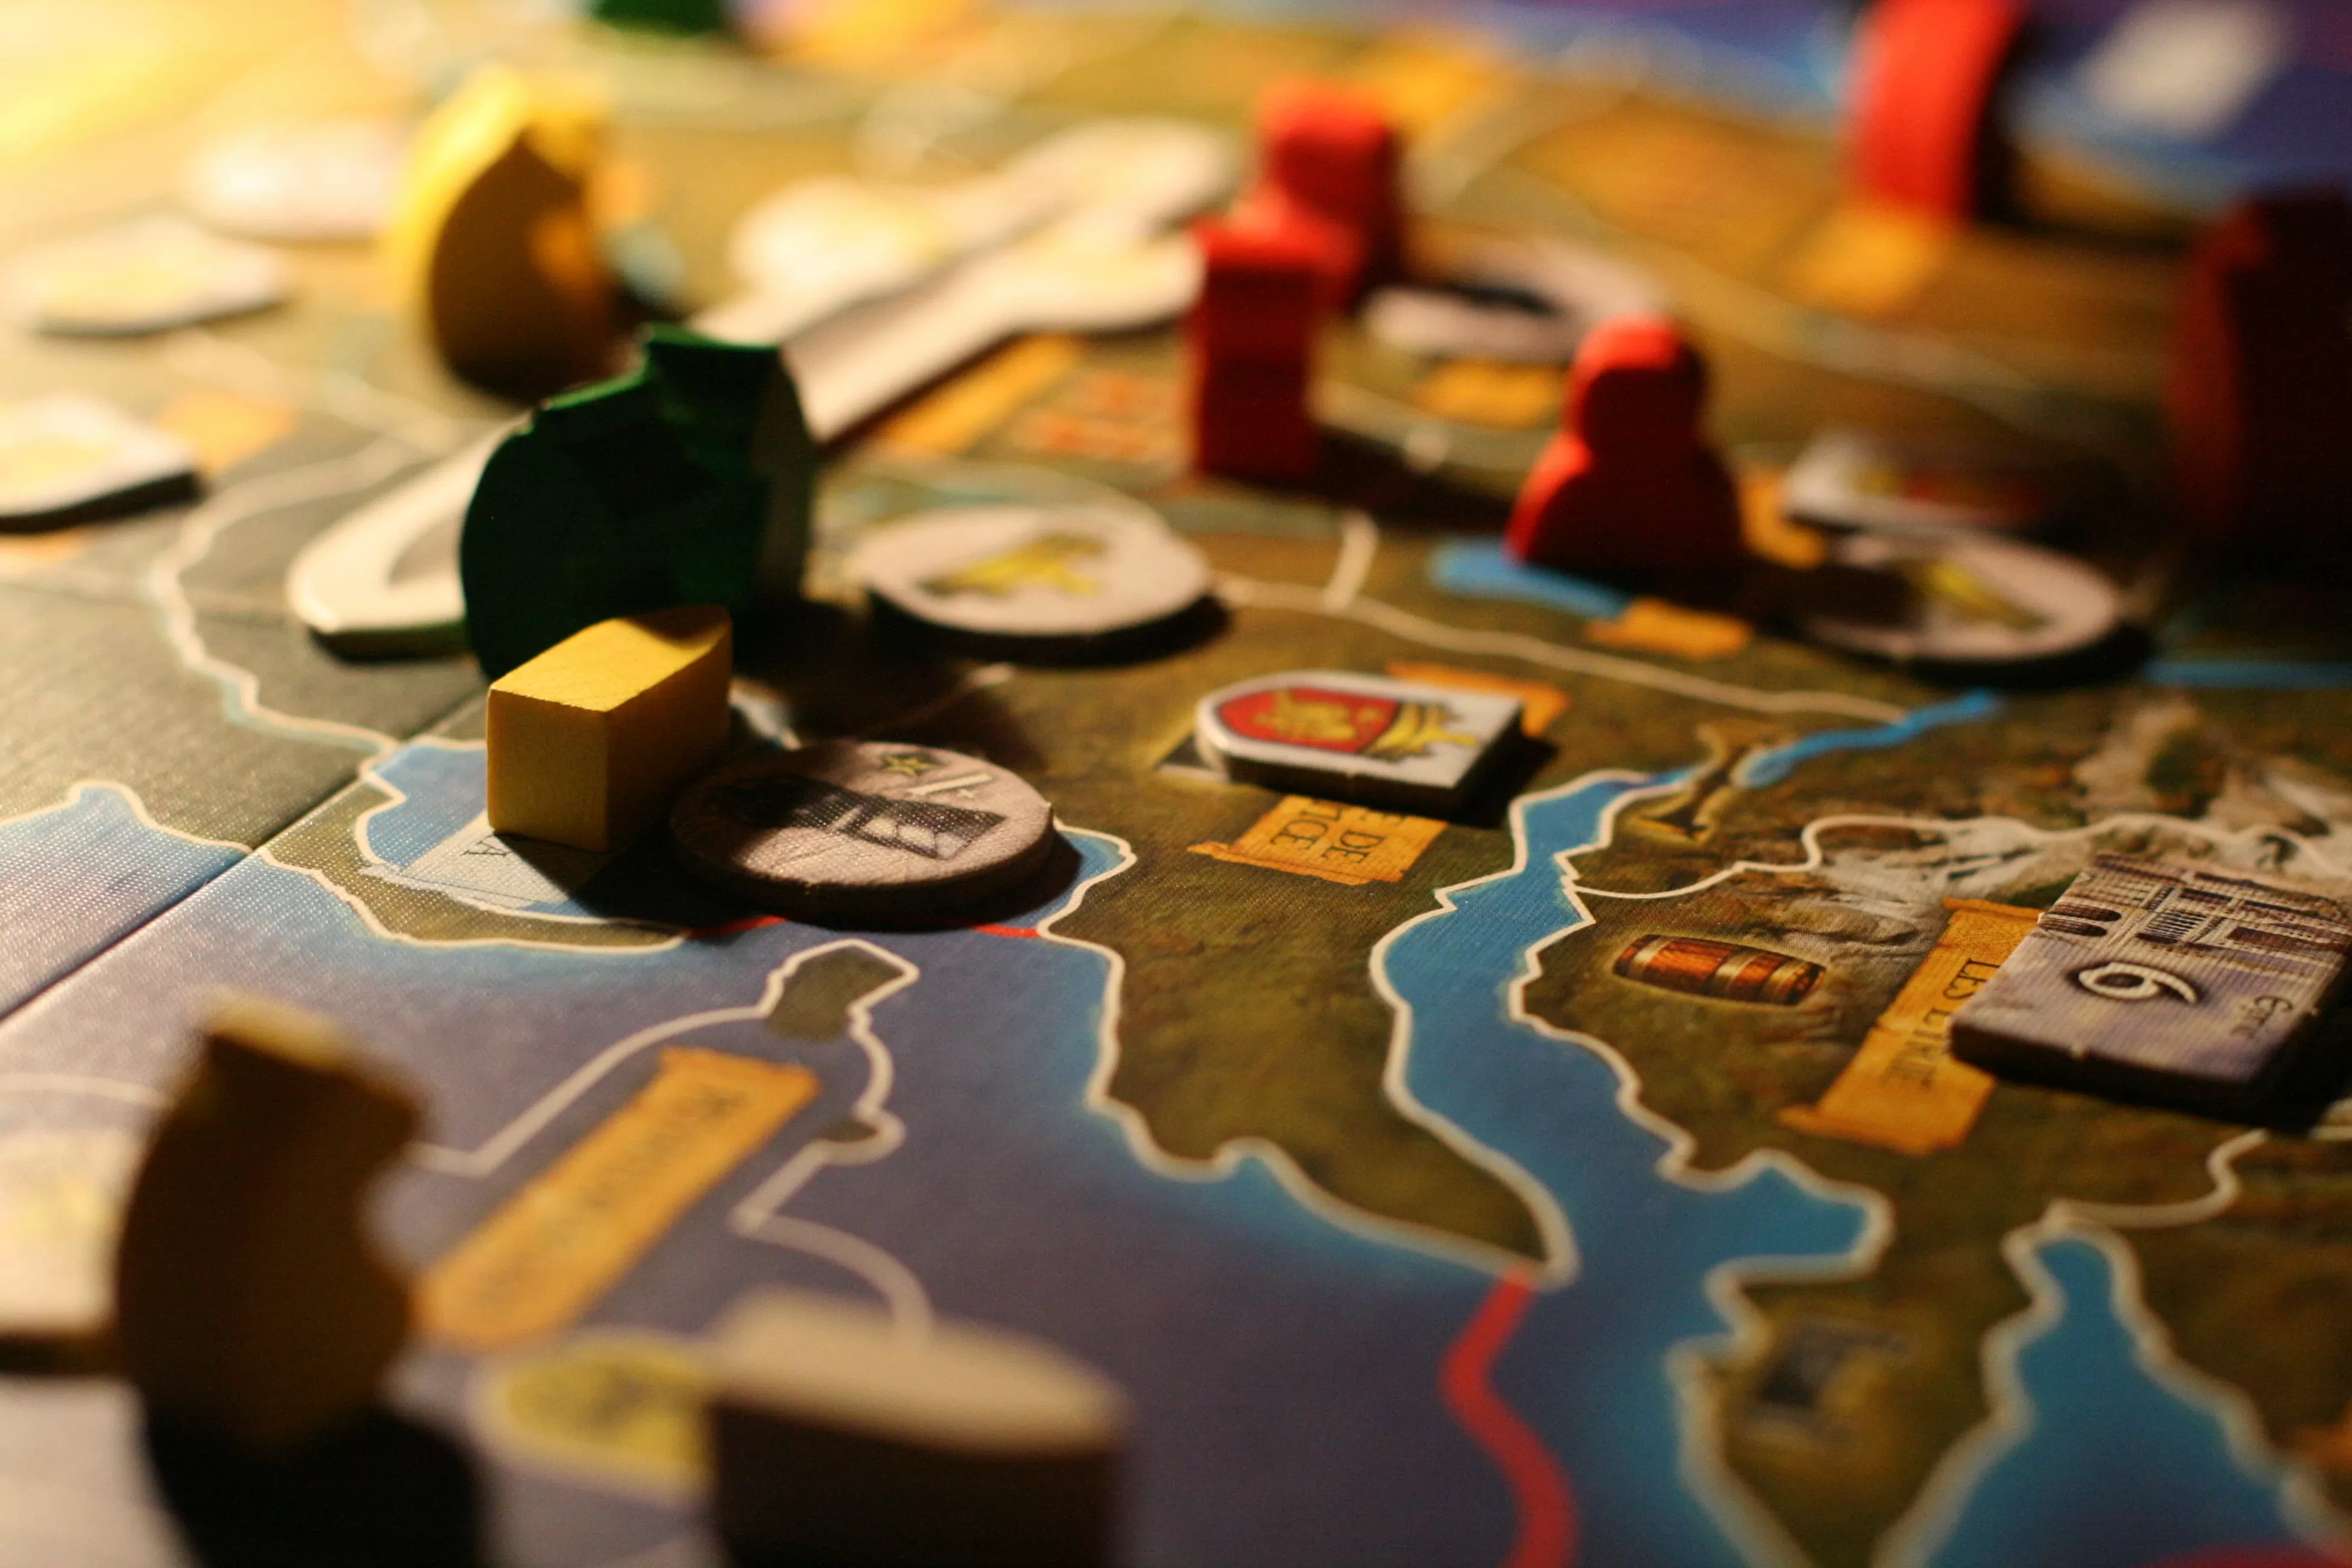 Game Of Thrones board game detail